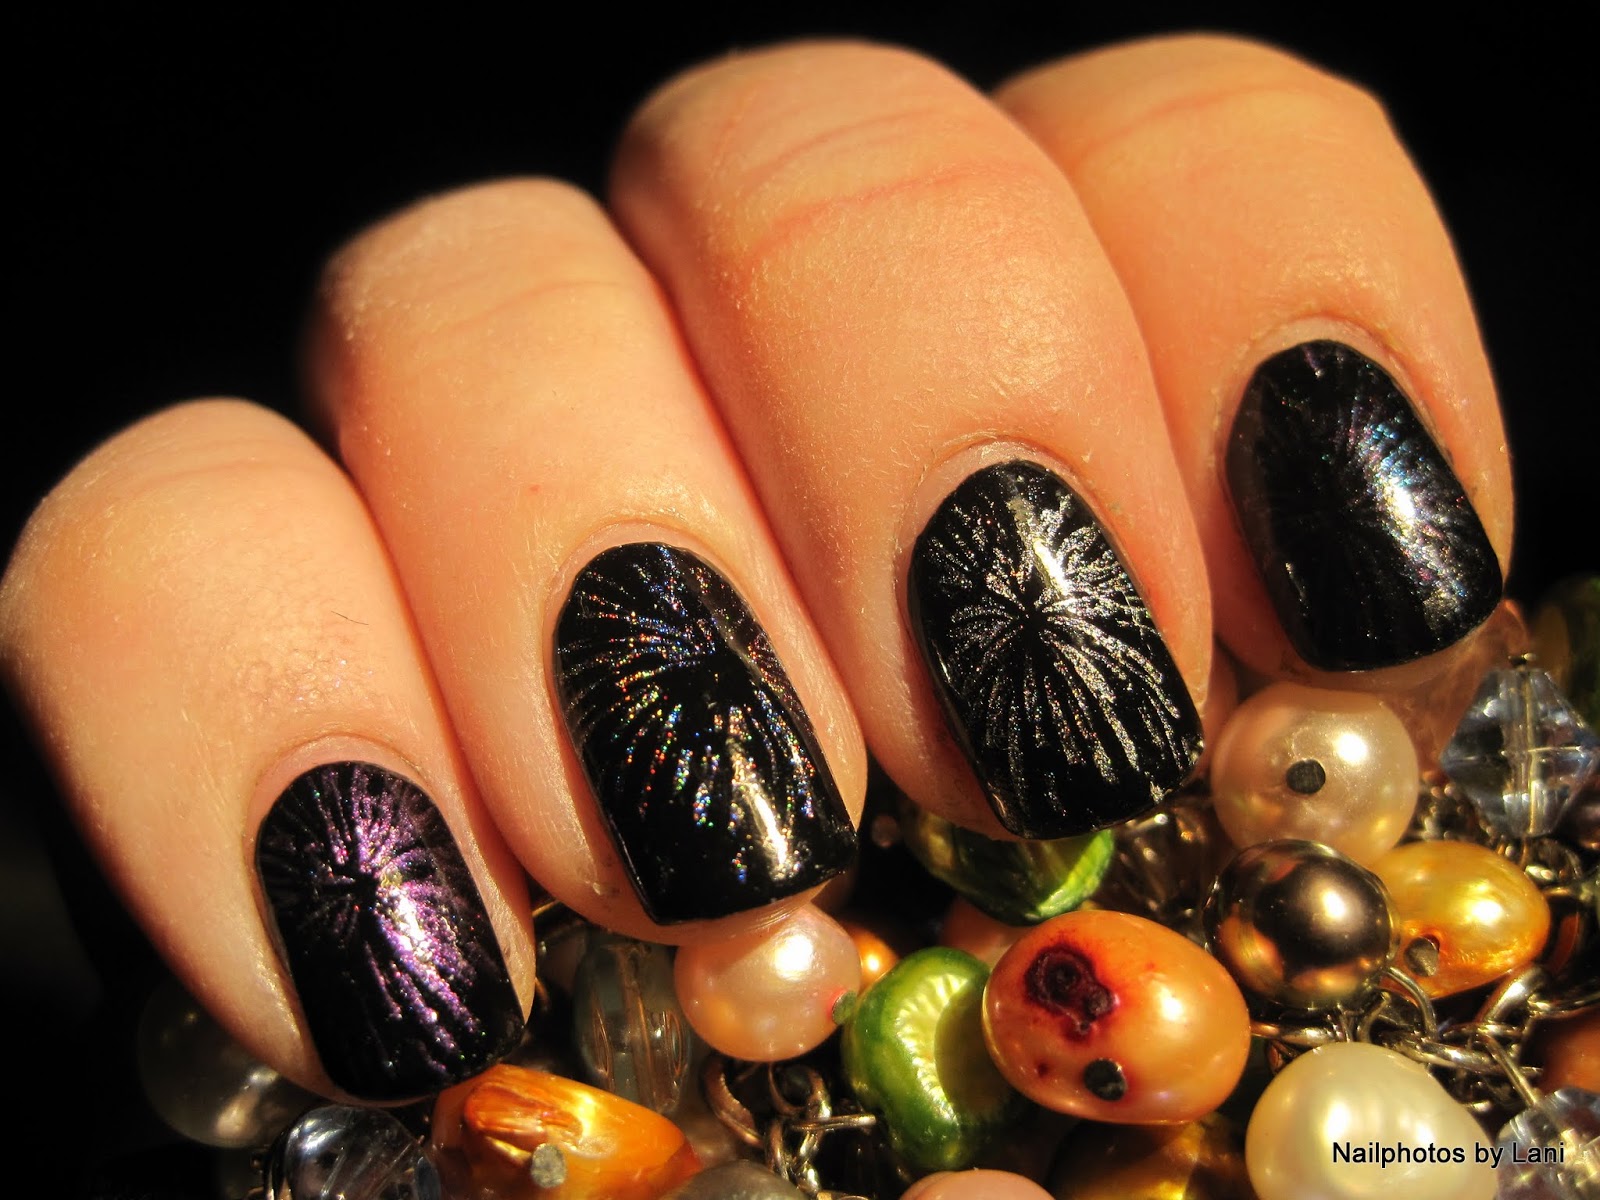 10. Midnight Sky Nail Art for New Year's Eve - wide 6